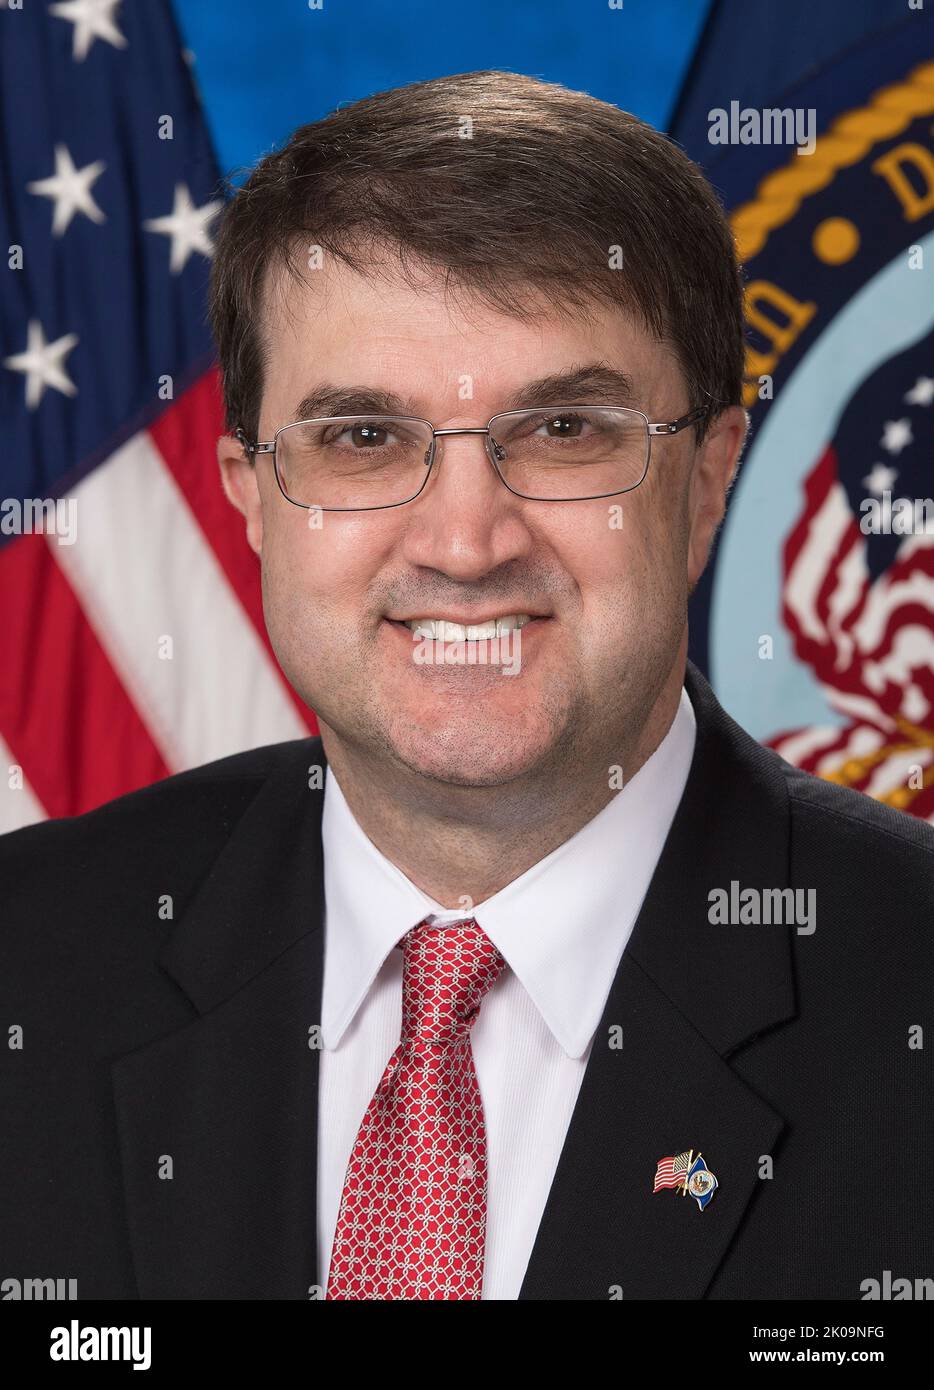 Robert Leon Wilkie Jr. (born August 2, 1962) American lawyer and government official who served as the United States Secretary of Veterans Affairs from 2018 to 2021, during the Trump administration. Under Secretary of Defense for Personnel and Readiness during the Trump administration, from November 2017 to July 2018. An Naval intelligence in the Reserve, he was Assistant Secretary of Defense for Legislative Affairs in the administration of President George W. Bush. Stock Photo